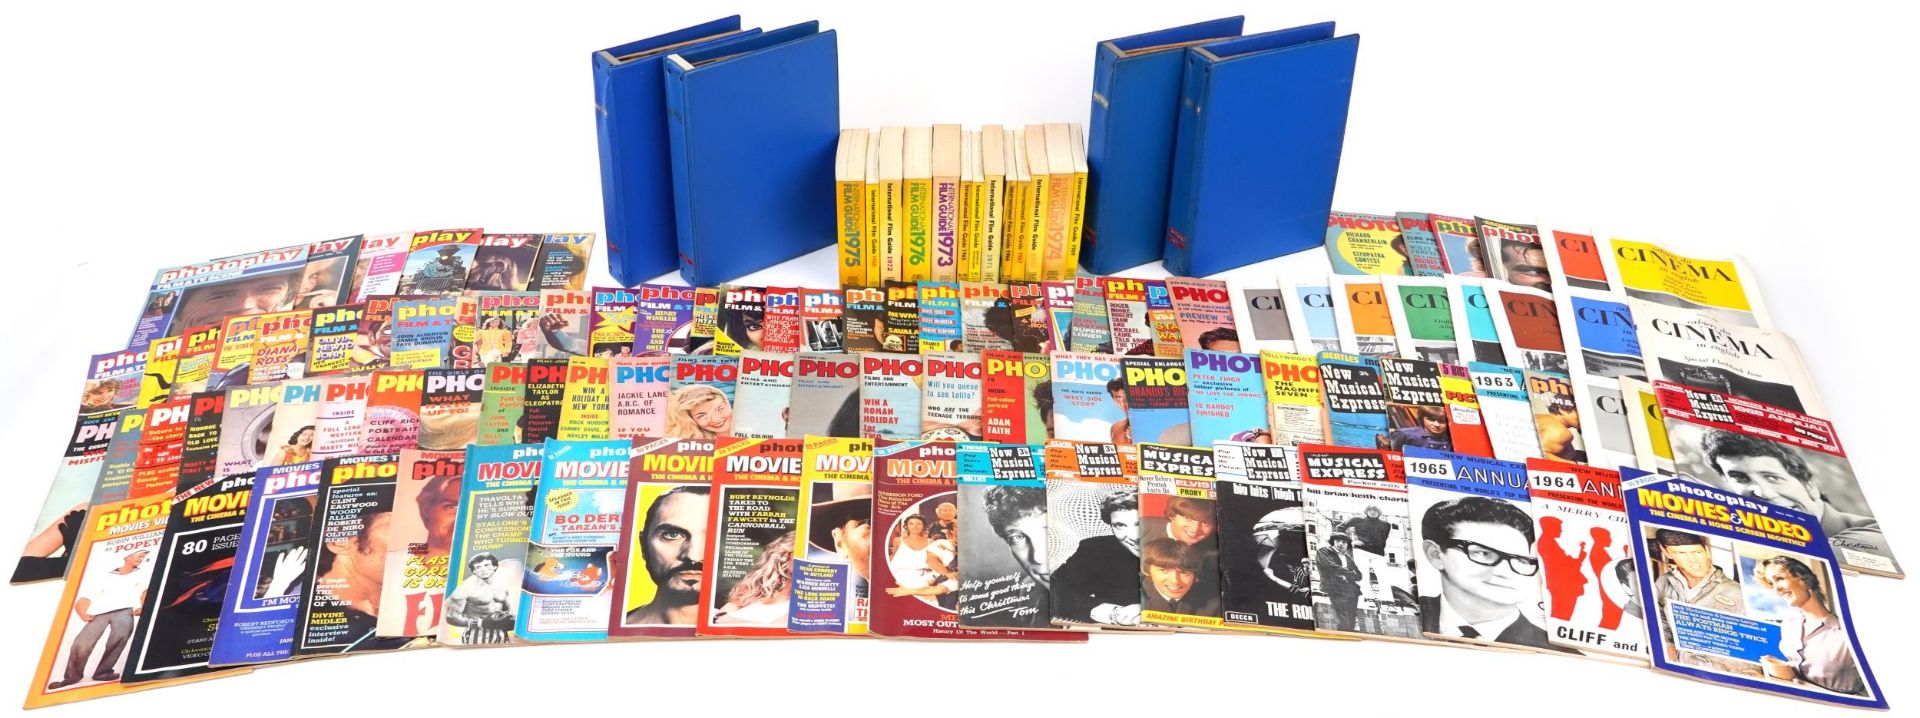 Large collection of 1960s and 70s film related memorabilia including Photoplay Film Monthly